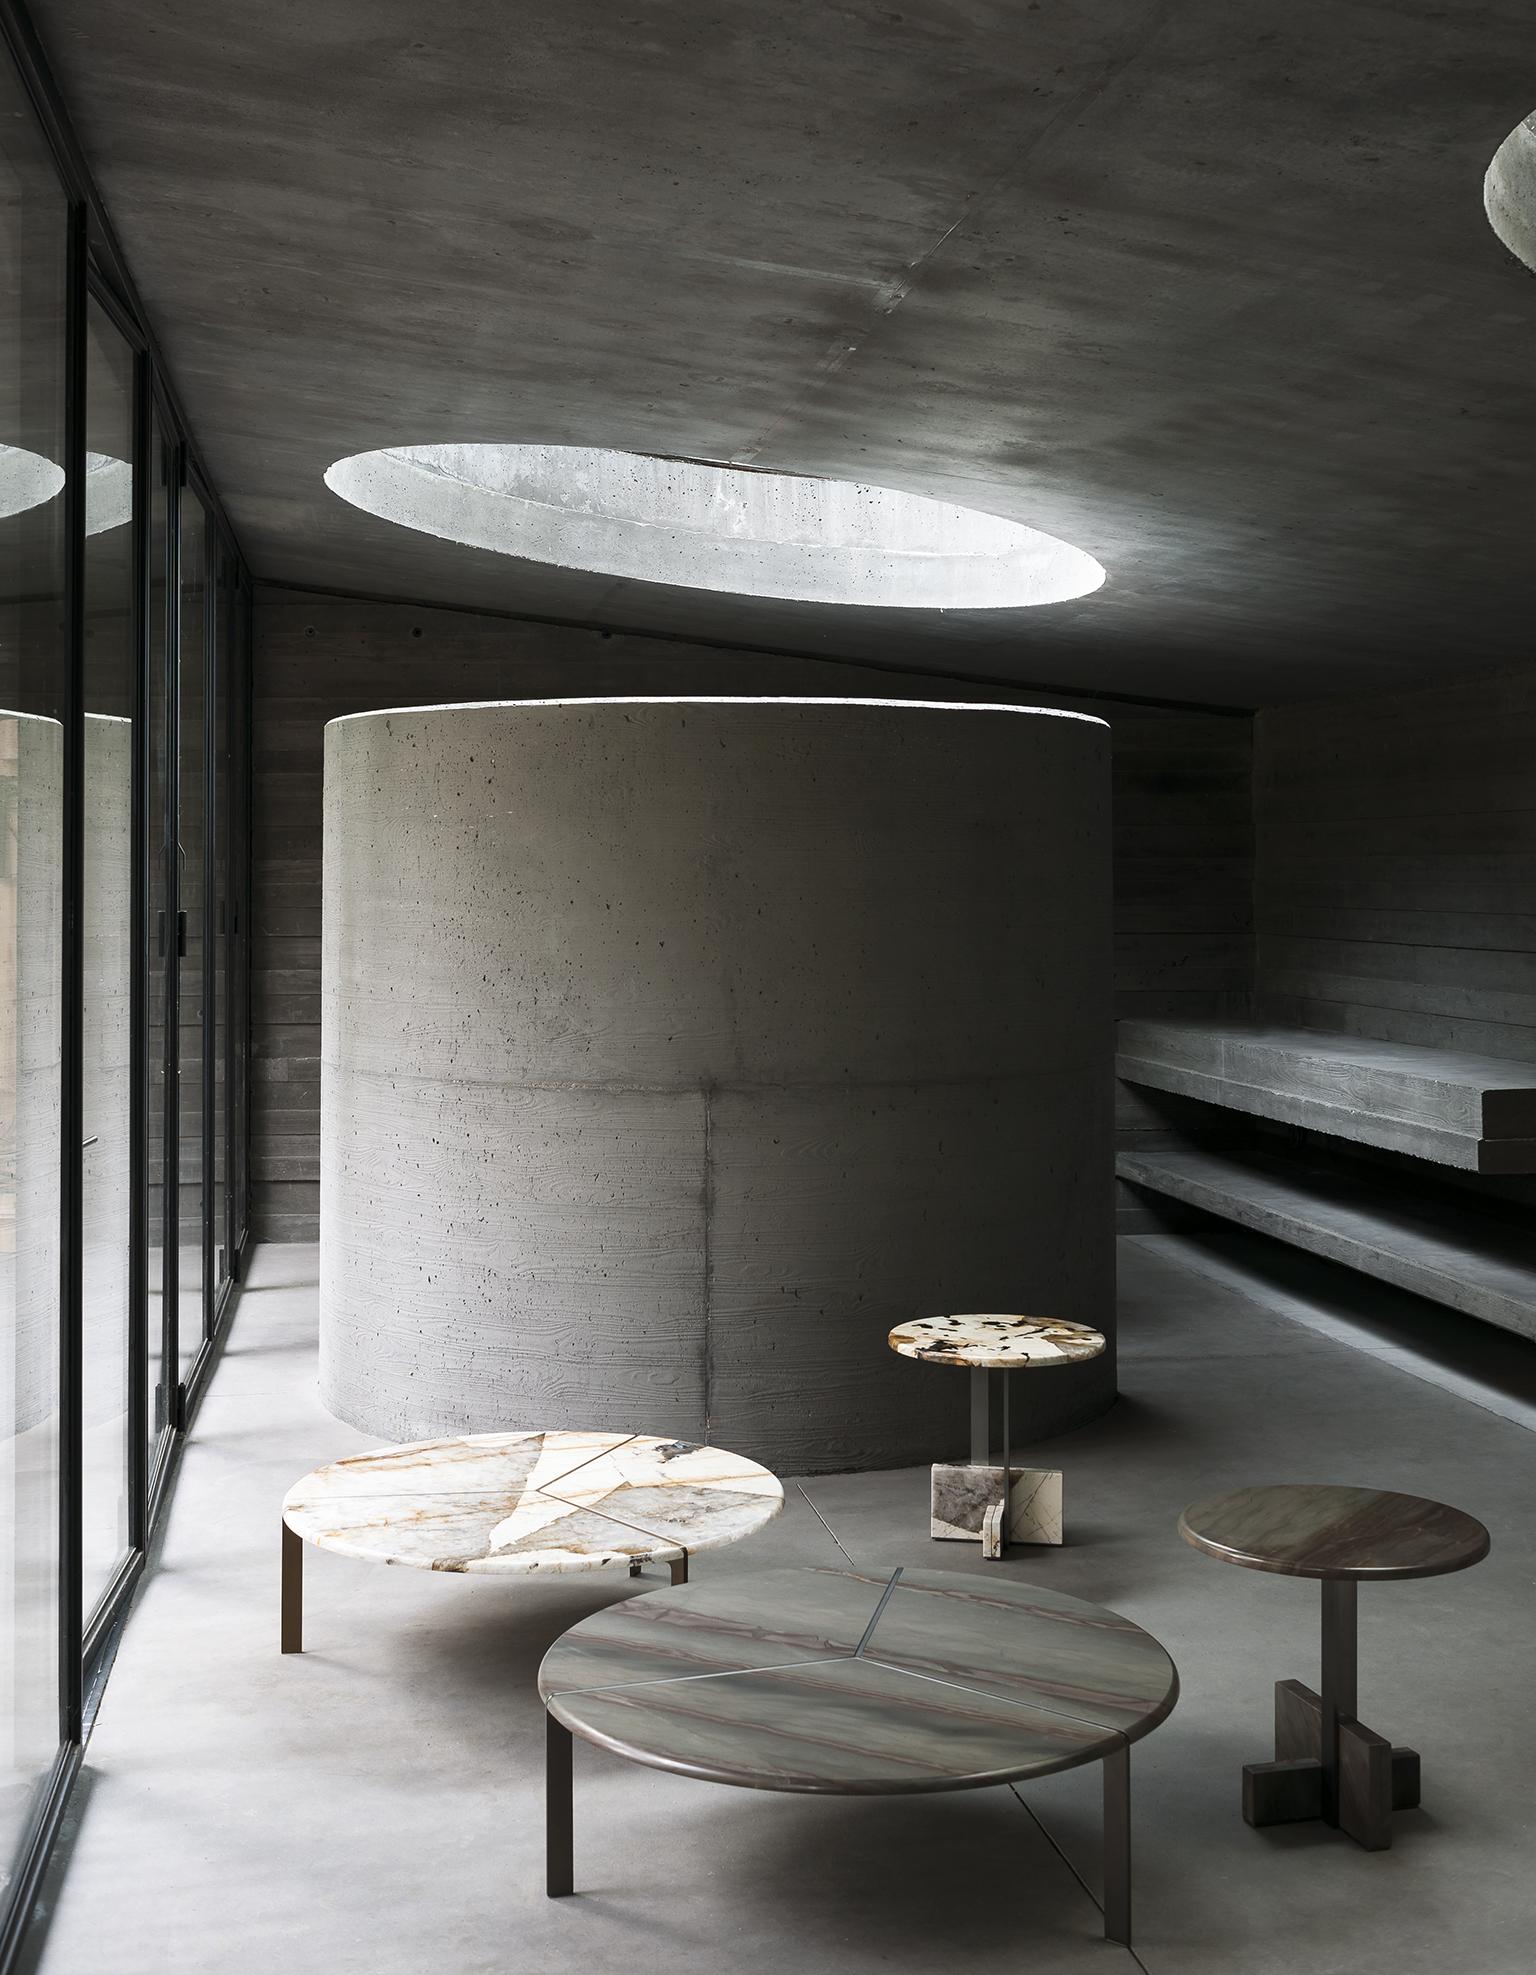 The softness of Brazilian furniture design between the 40s and 60s in the modernist architecture of Niemeyer, Costa, Vilanova Artigas and Bo Bardi provides the inspiration for the new collection of Joaquim tables by Bonaguro for Tacchini. In